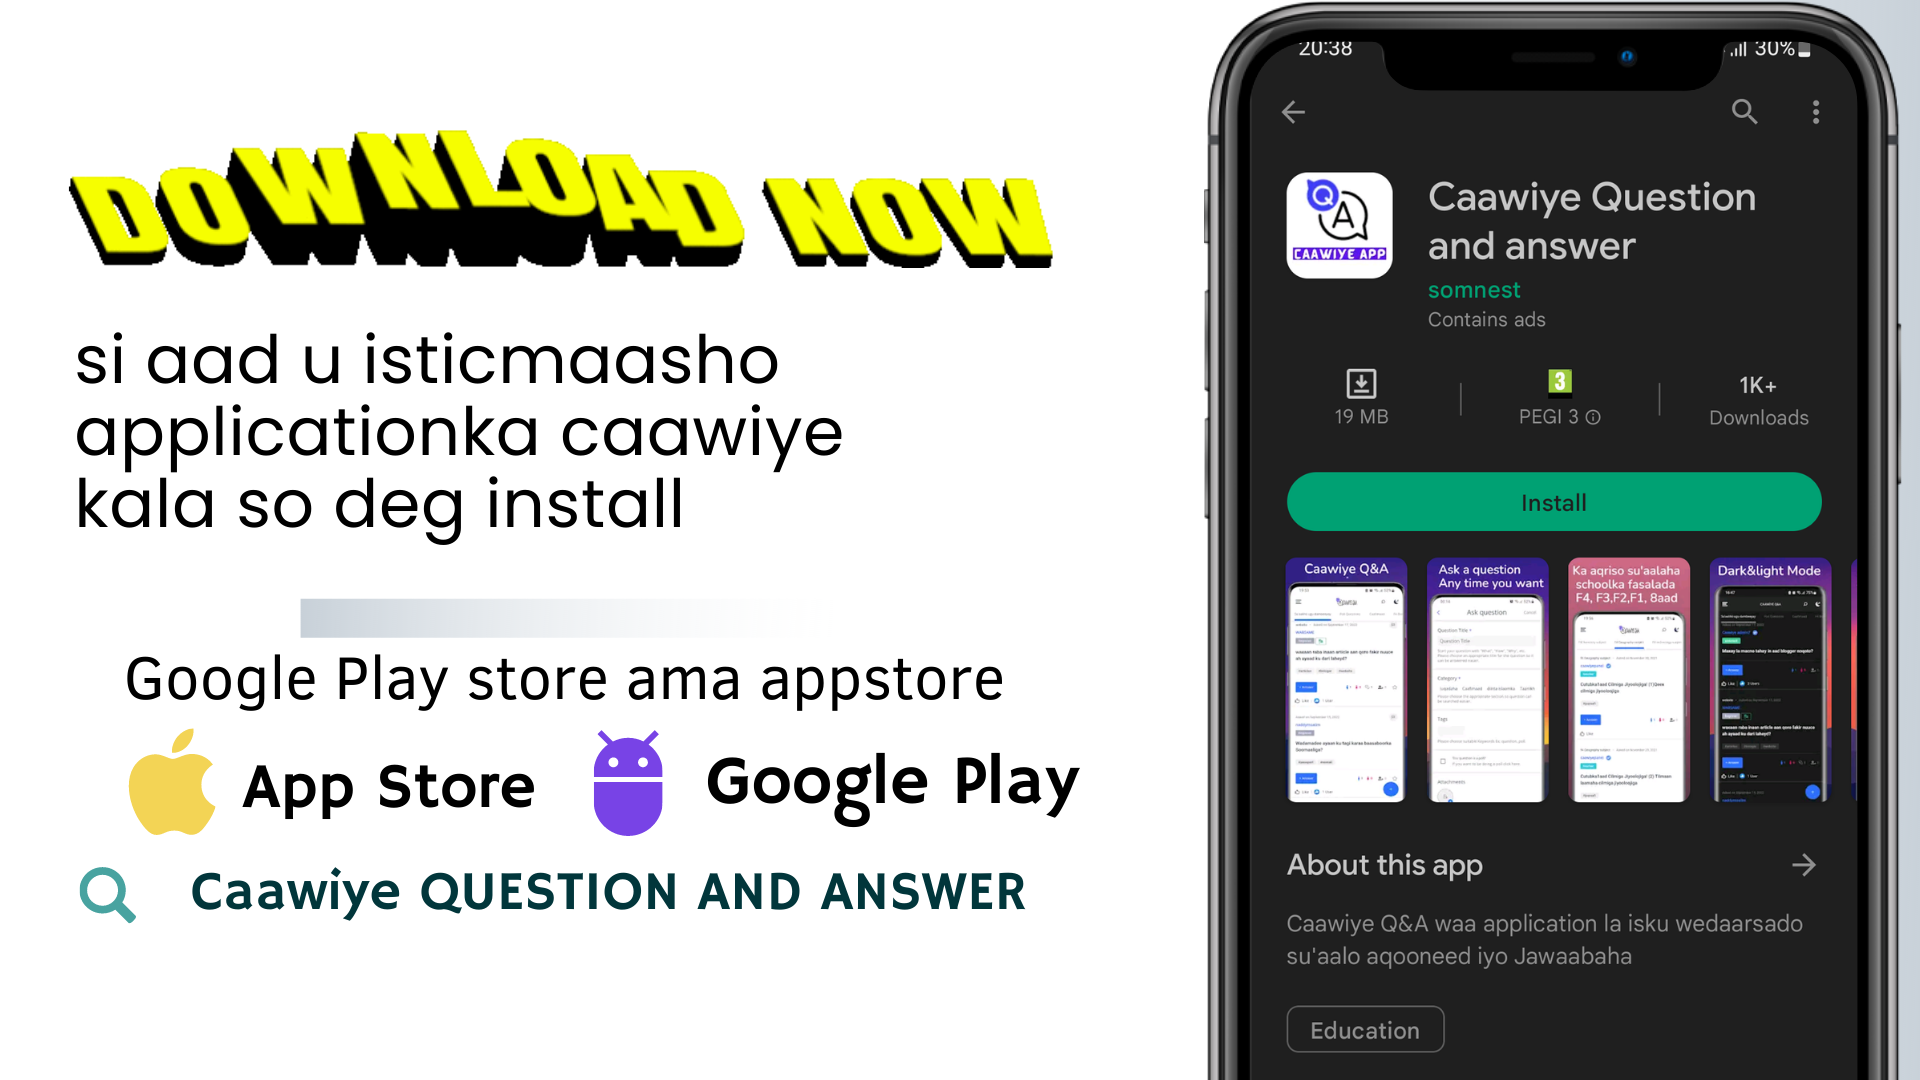 Copy of Caawiye question and answer